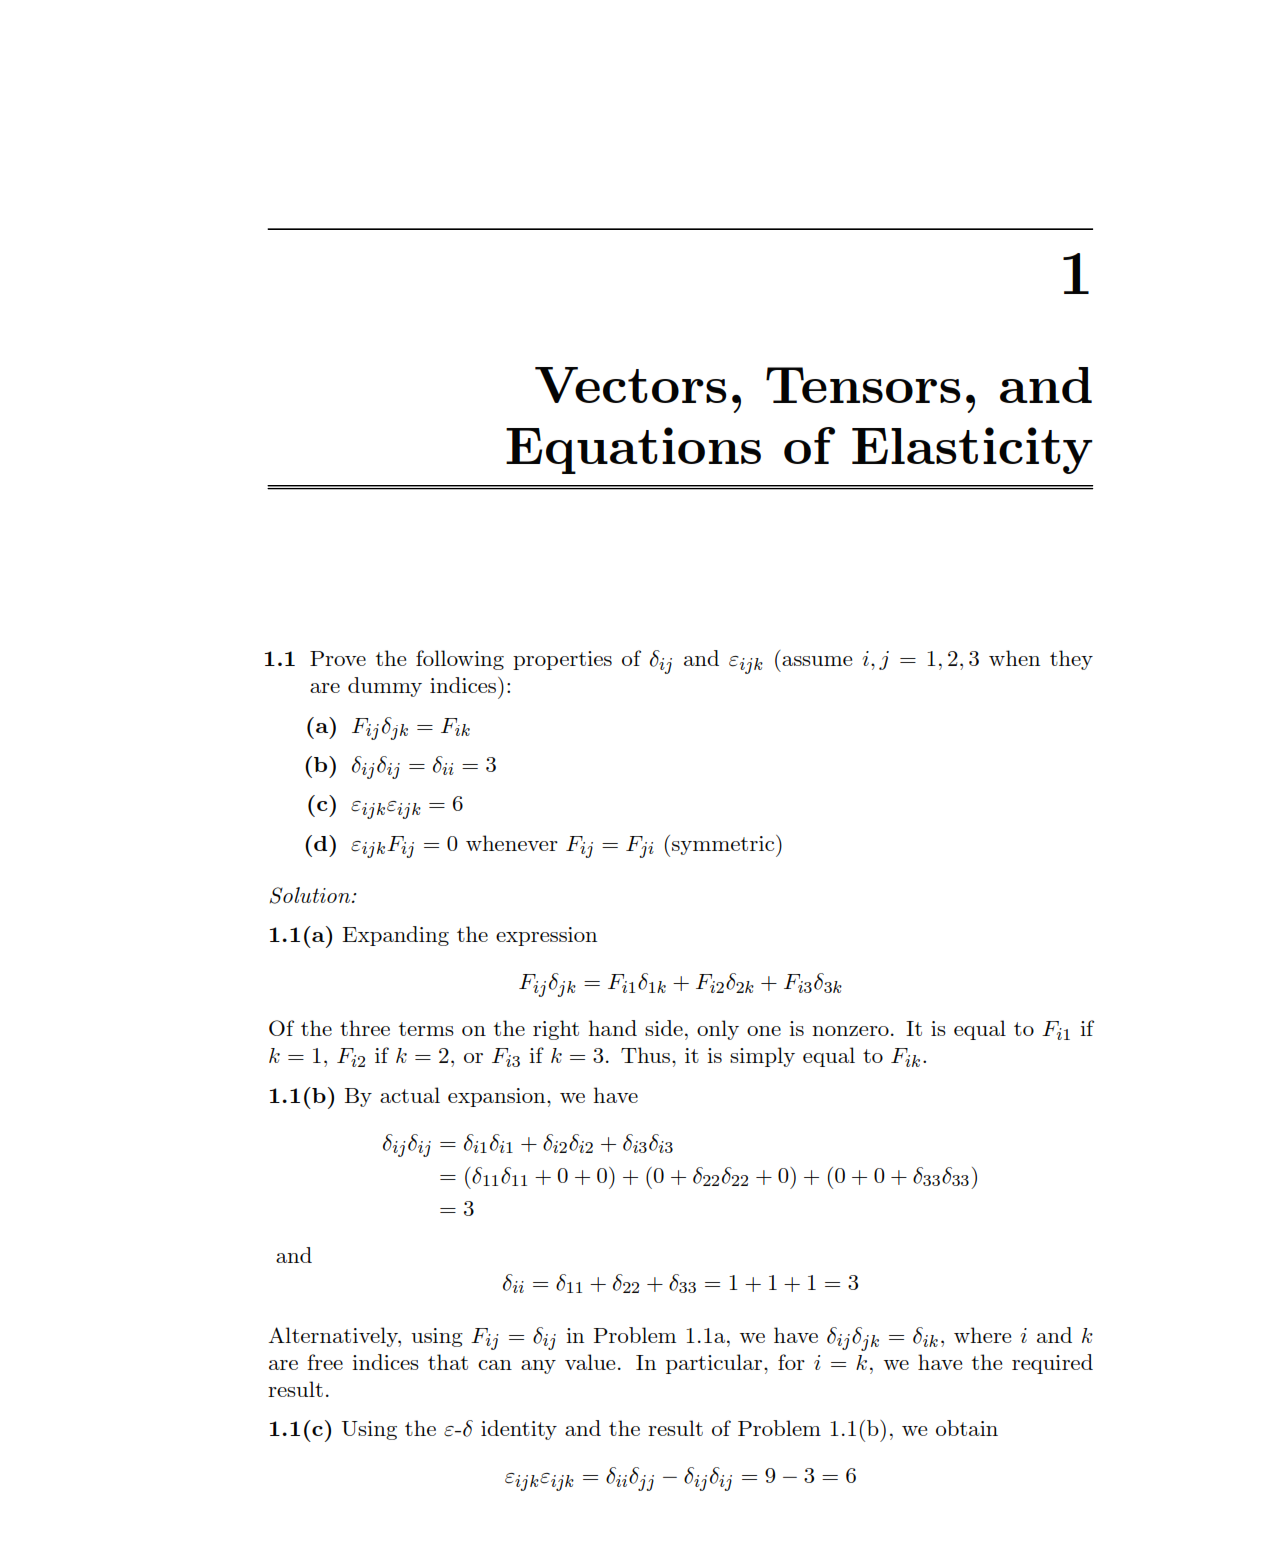 download free mechanics of laminated composite plates and shells theory and analysis Reddy solution manual pdf | 1st & 2nd ( second ) edition